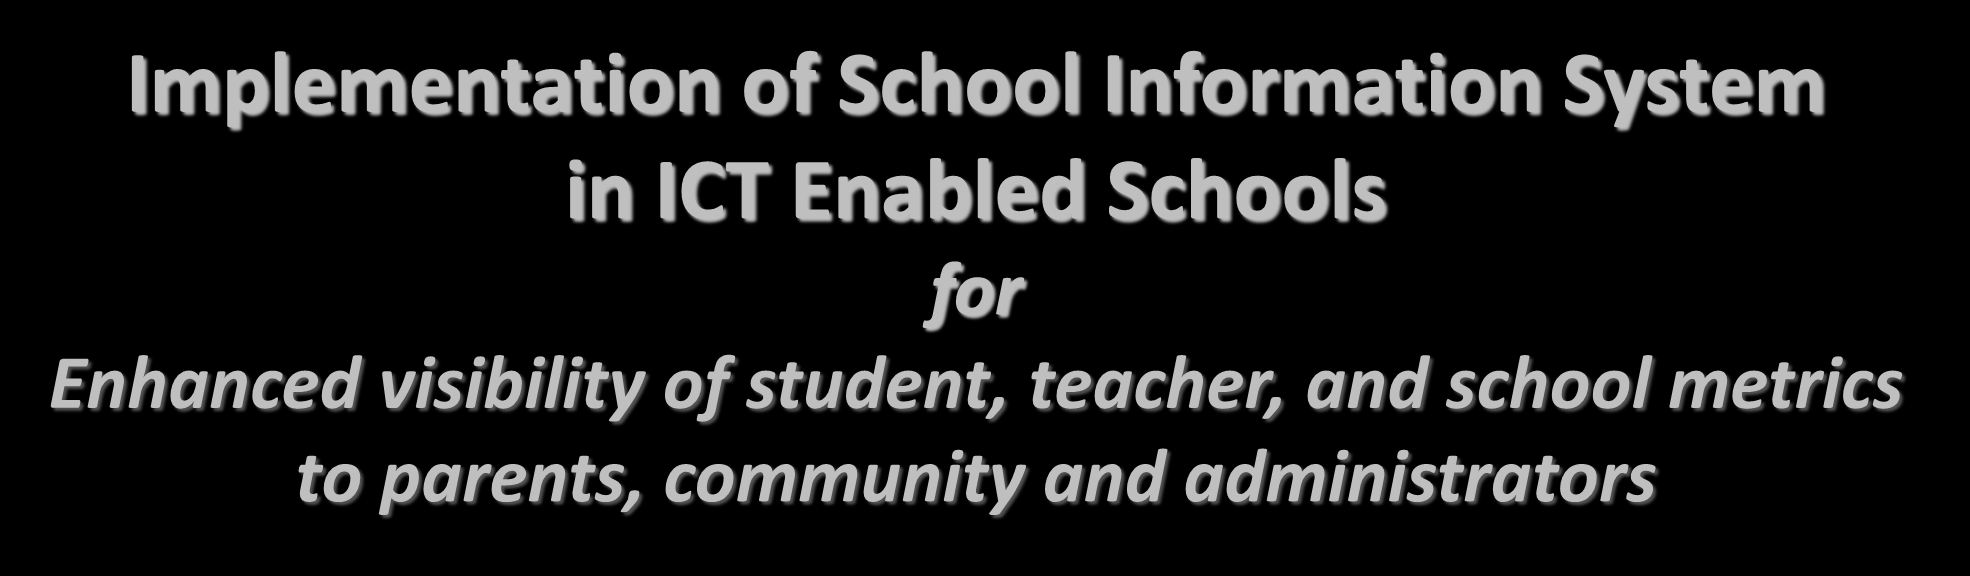 School Education Mission Mode Project Phase I Implementation of School Information System in ICT Enabled Schools for